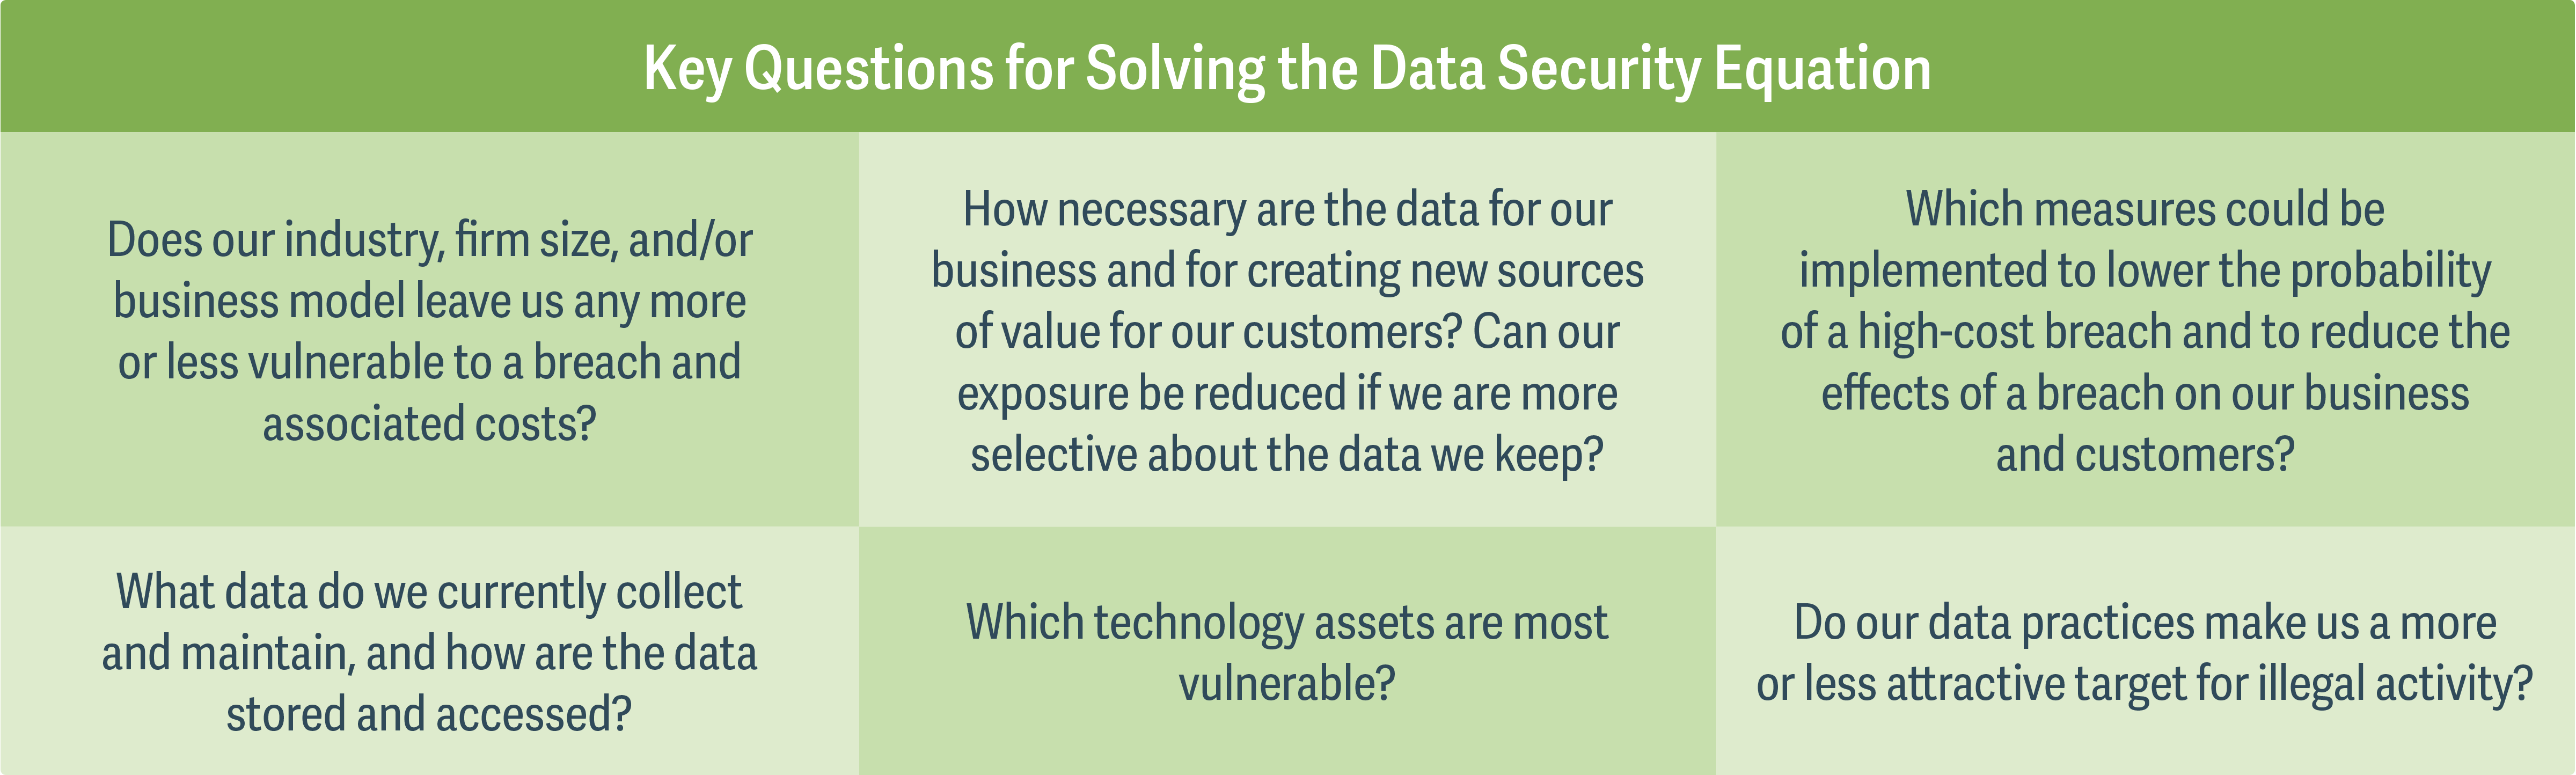 How Much Is Enough? Applying the “Rule of Reason” to Data Security- Figure 1